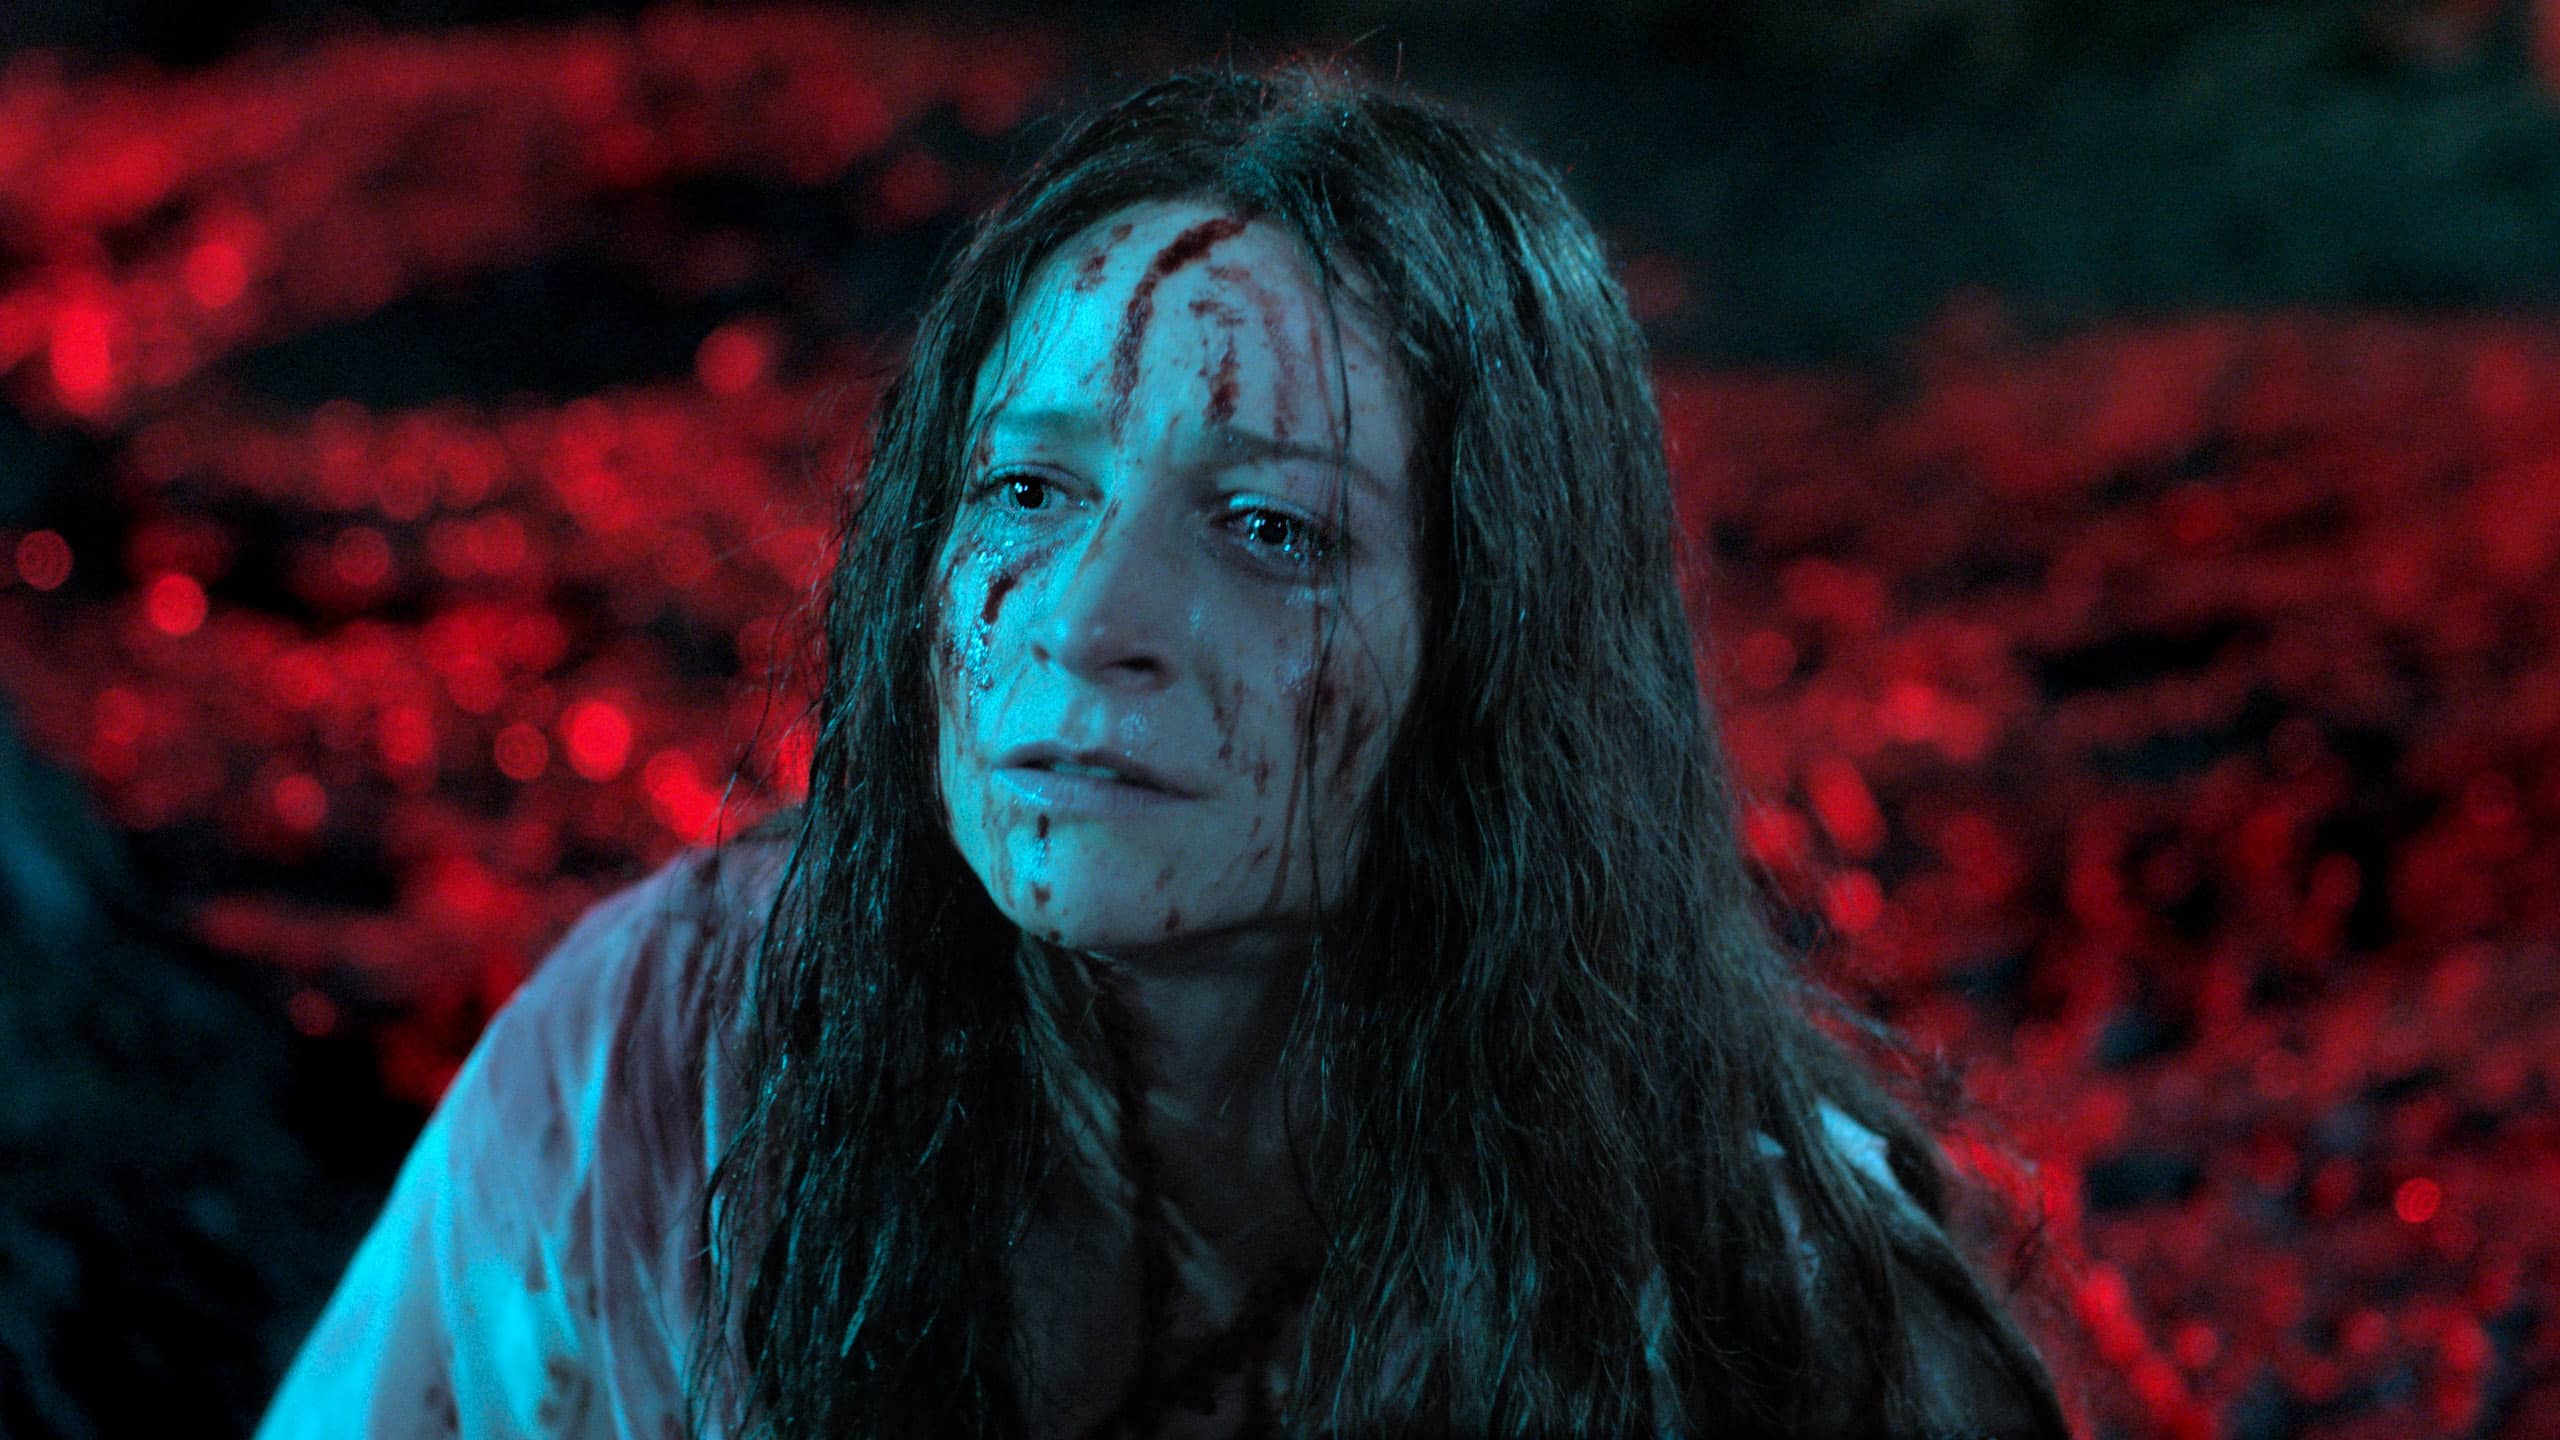 A picture of Enid (Niamh Algar) in her “final girl” scene. The background is a blurry red, focused only on disheveled Enid, who is covered in blood and tears. There is blood matting her hair and blood contrasting on her white dress.